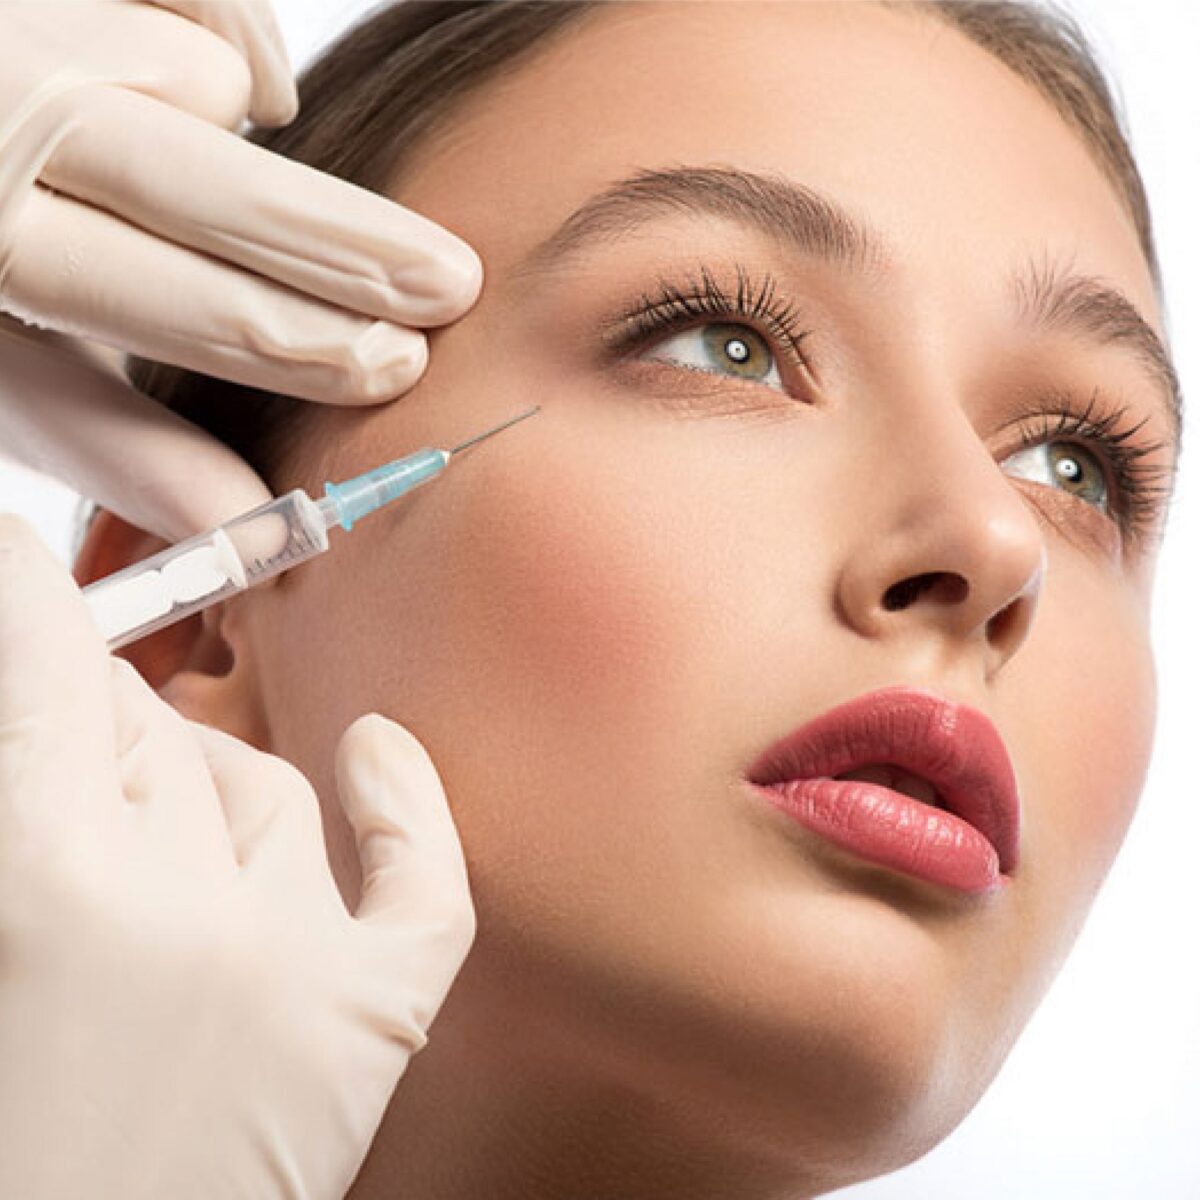 The Art of Beauty: Discovering Exquisite Services at an Aesthetic Clinic in London